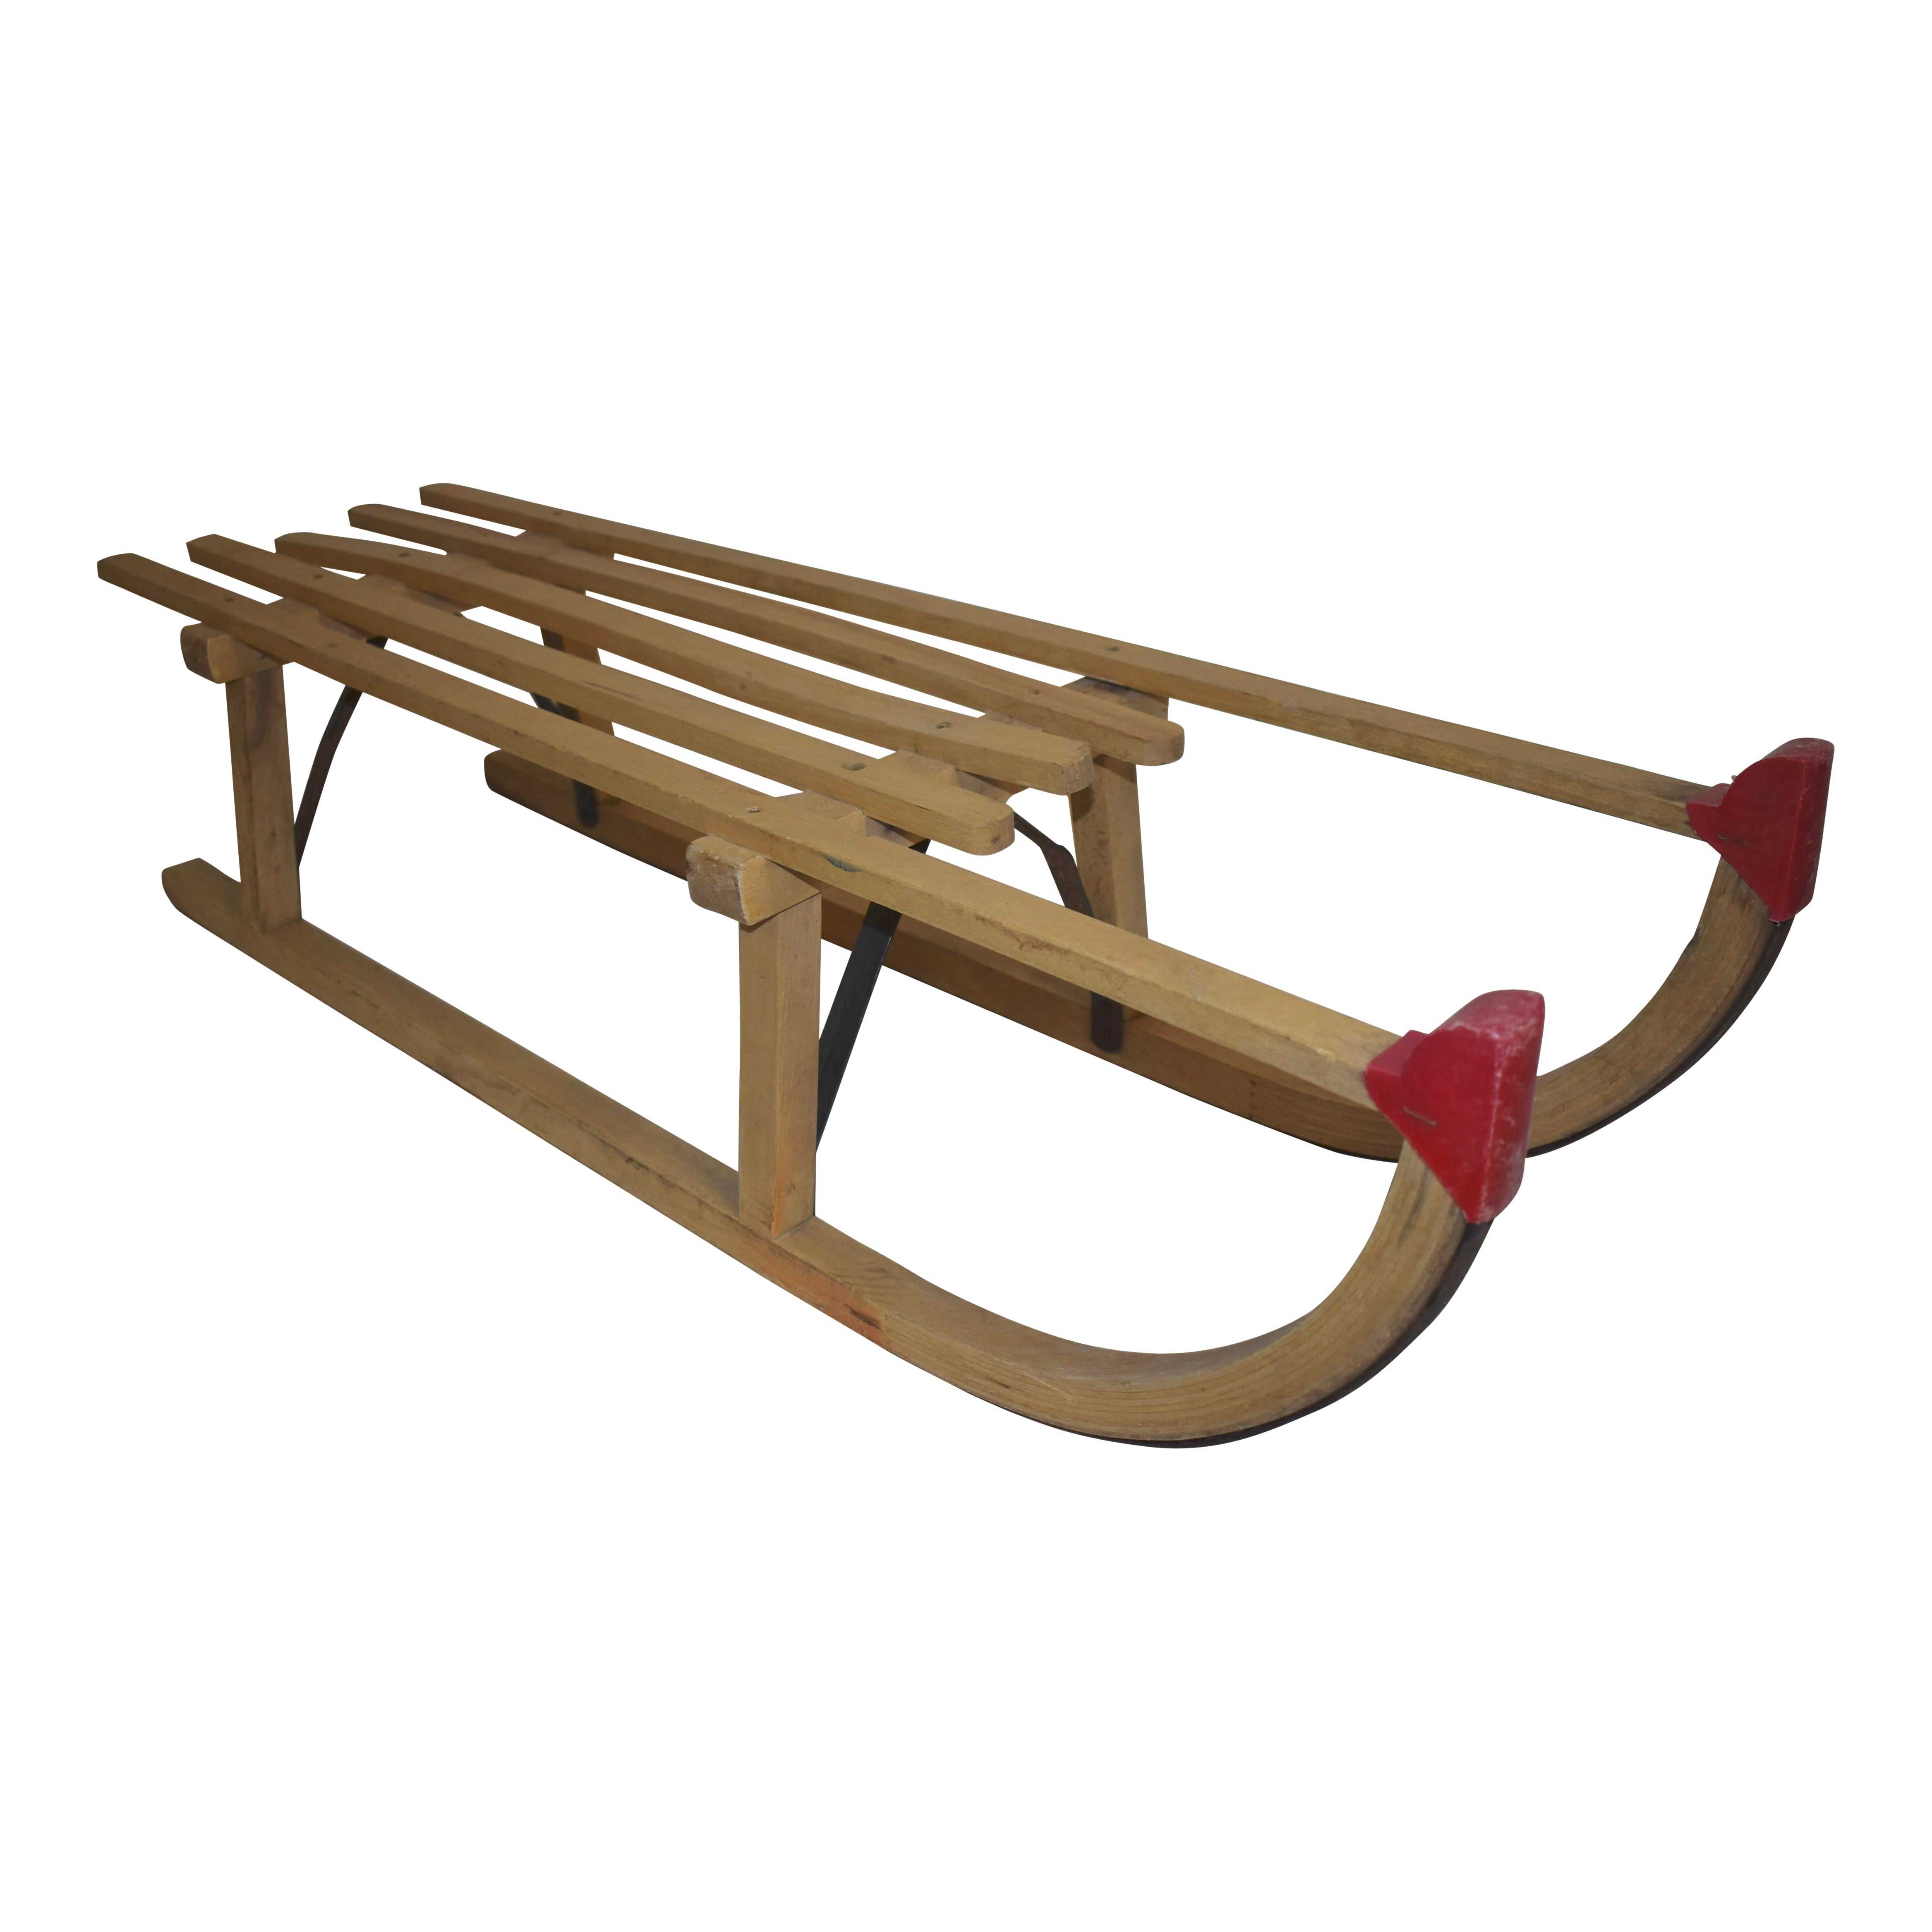 Wooden Tracker Snow Sled